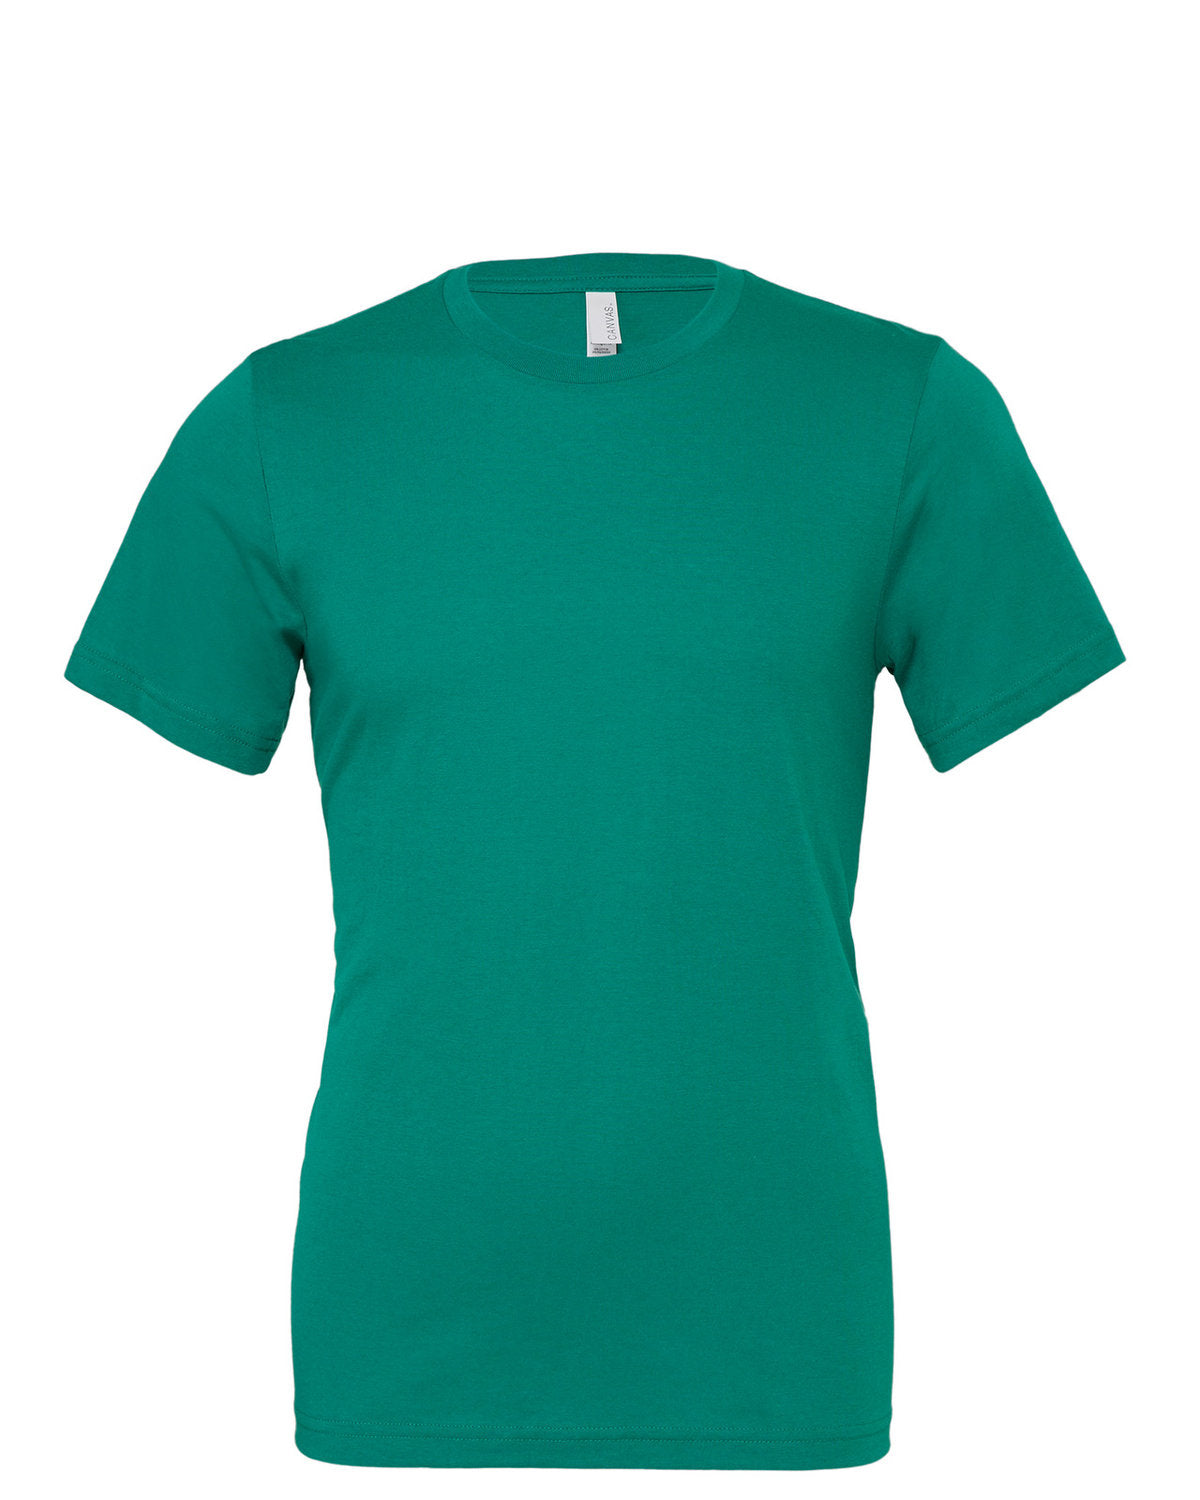 Plain emerald green Bella Canvas t-shirt with custom embroidery on a white background, displayed flat with short sleeves and a round neck by Show Off Your Threads.